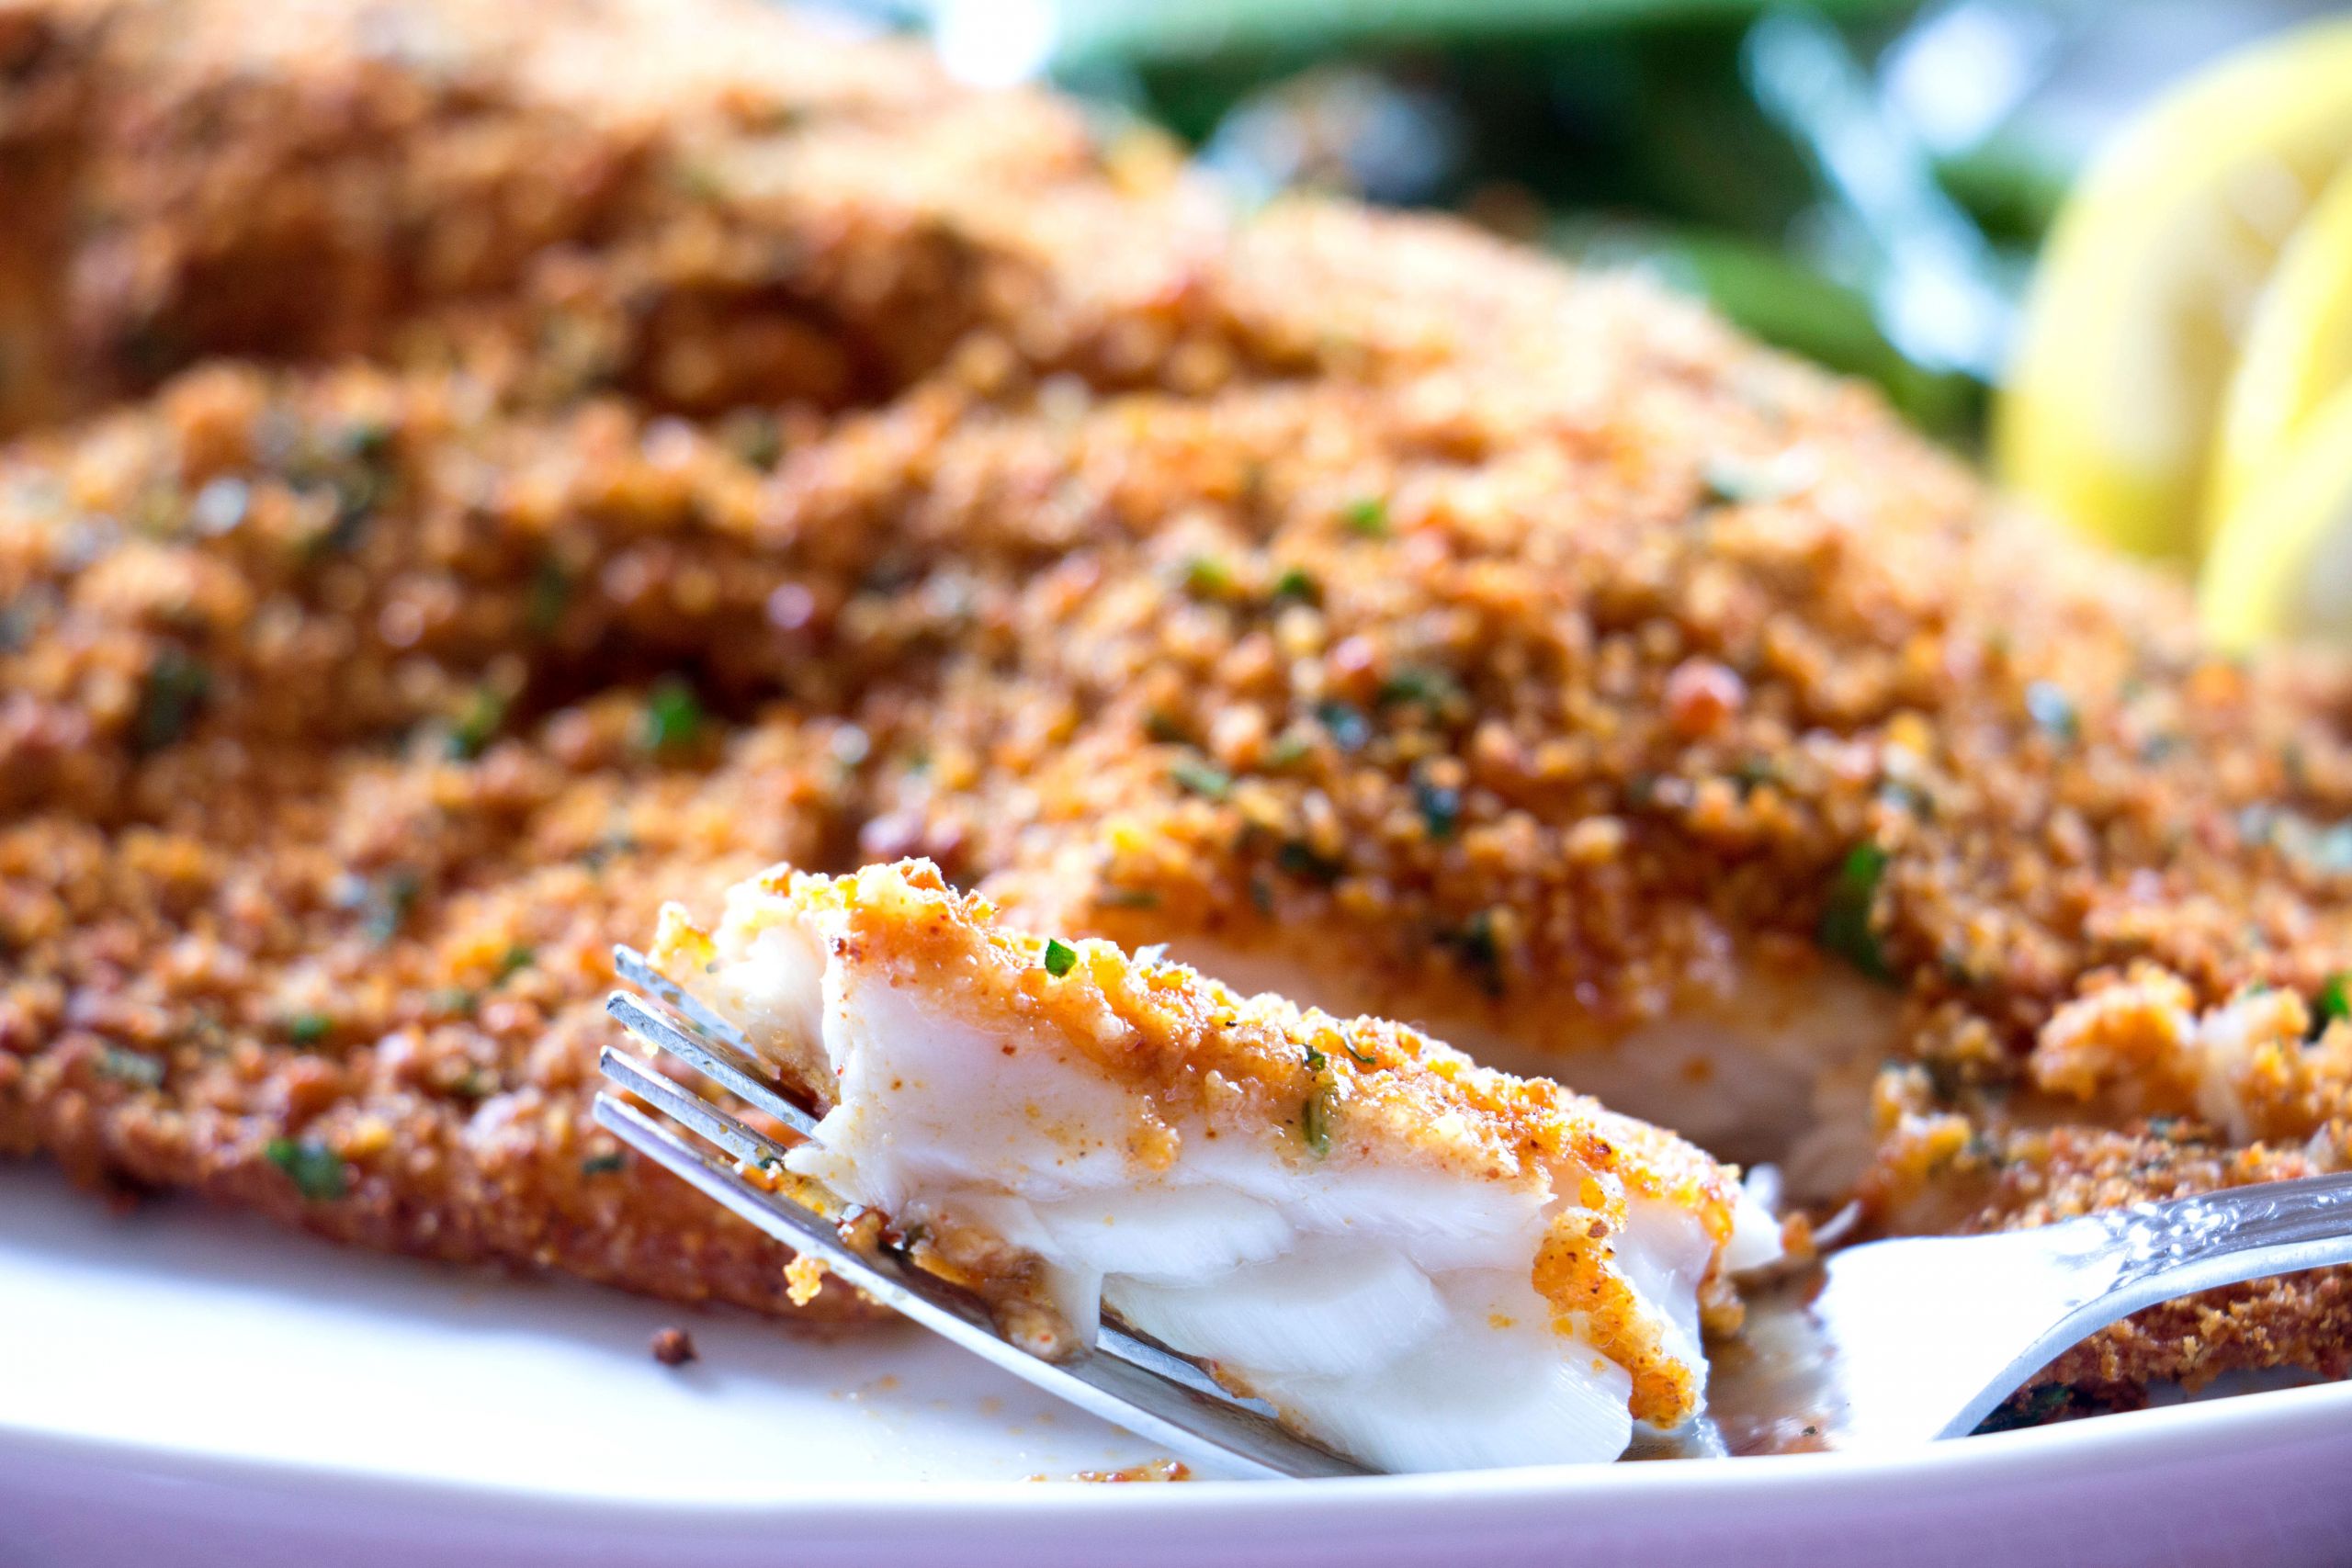 Recipes For Tilapia Fish In The Oven
 Baked Tilapia with Parmesan Crust Recipe from Pescetarian